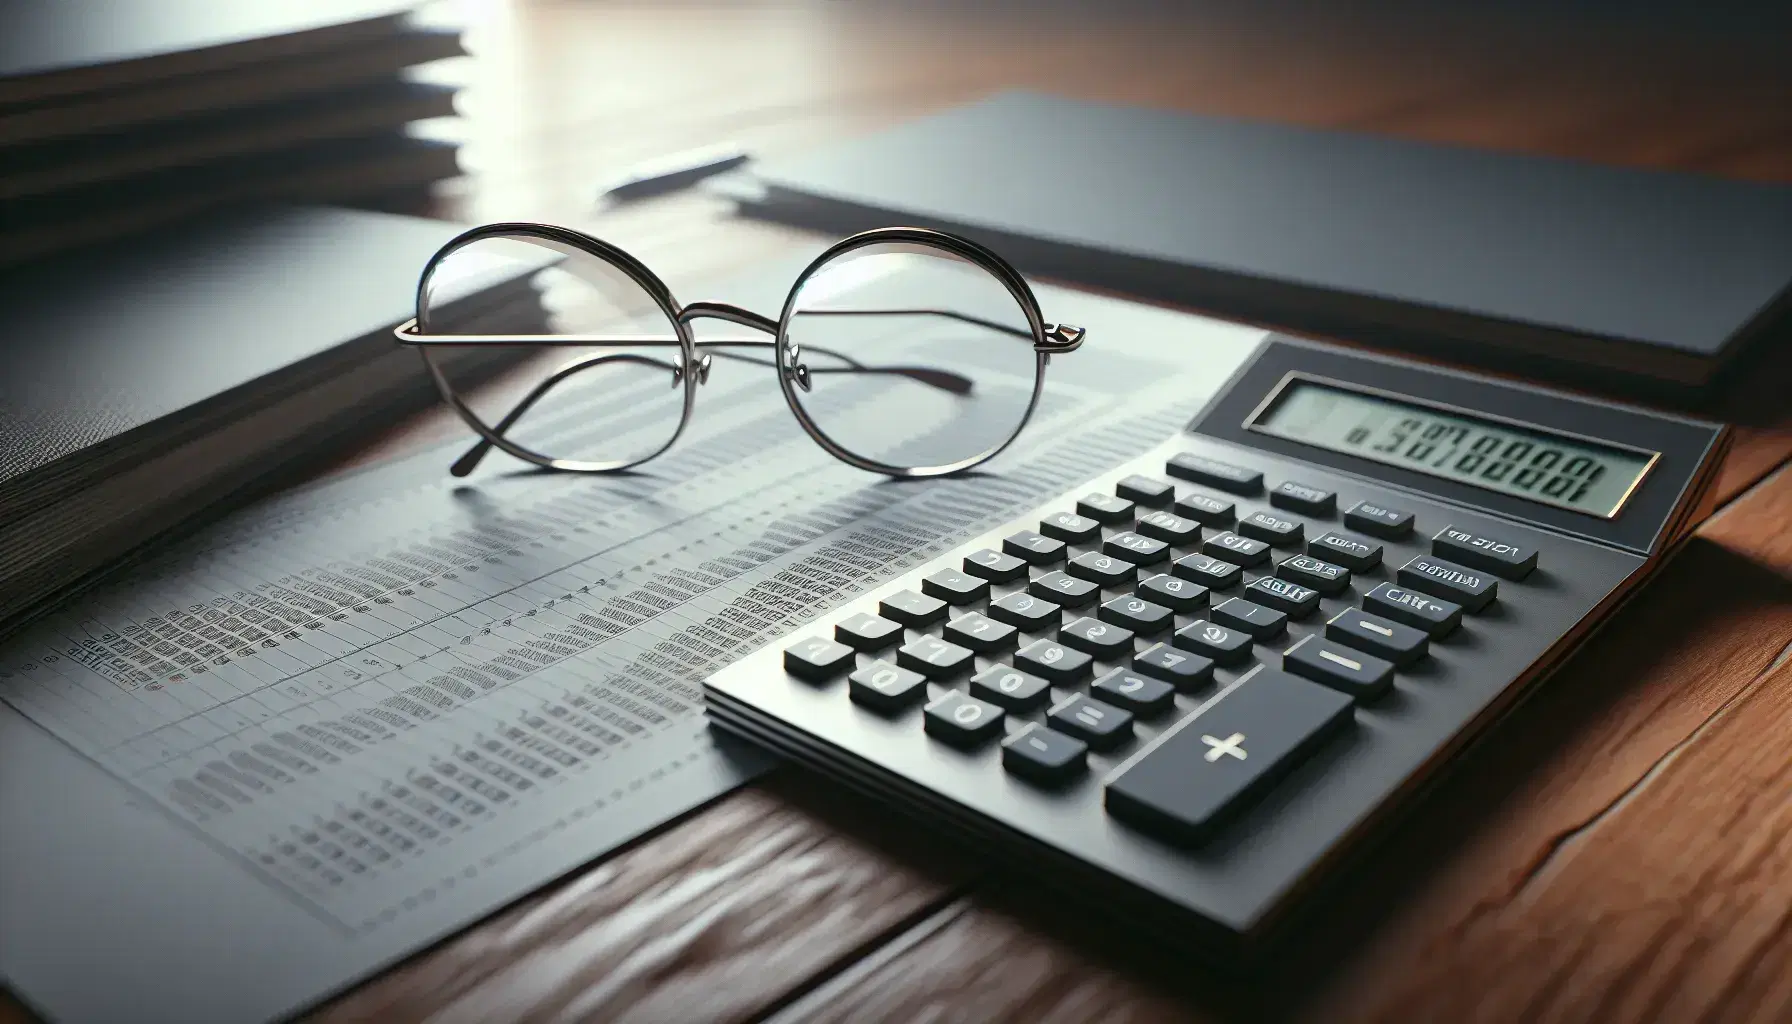 Close-up view of a dark grey calculator with blank display and light grey buttons on a wooden desk, beside round-rimmed eyeglasses and blurred financial chart.